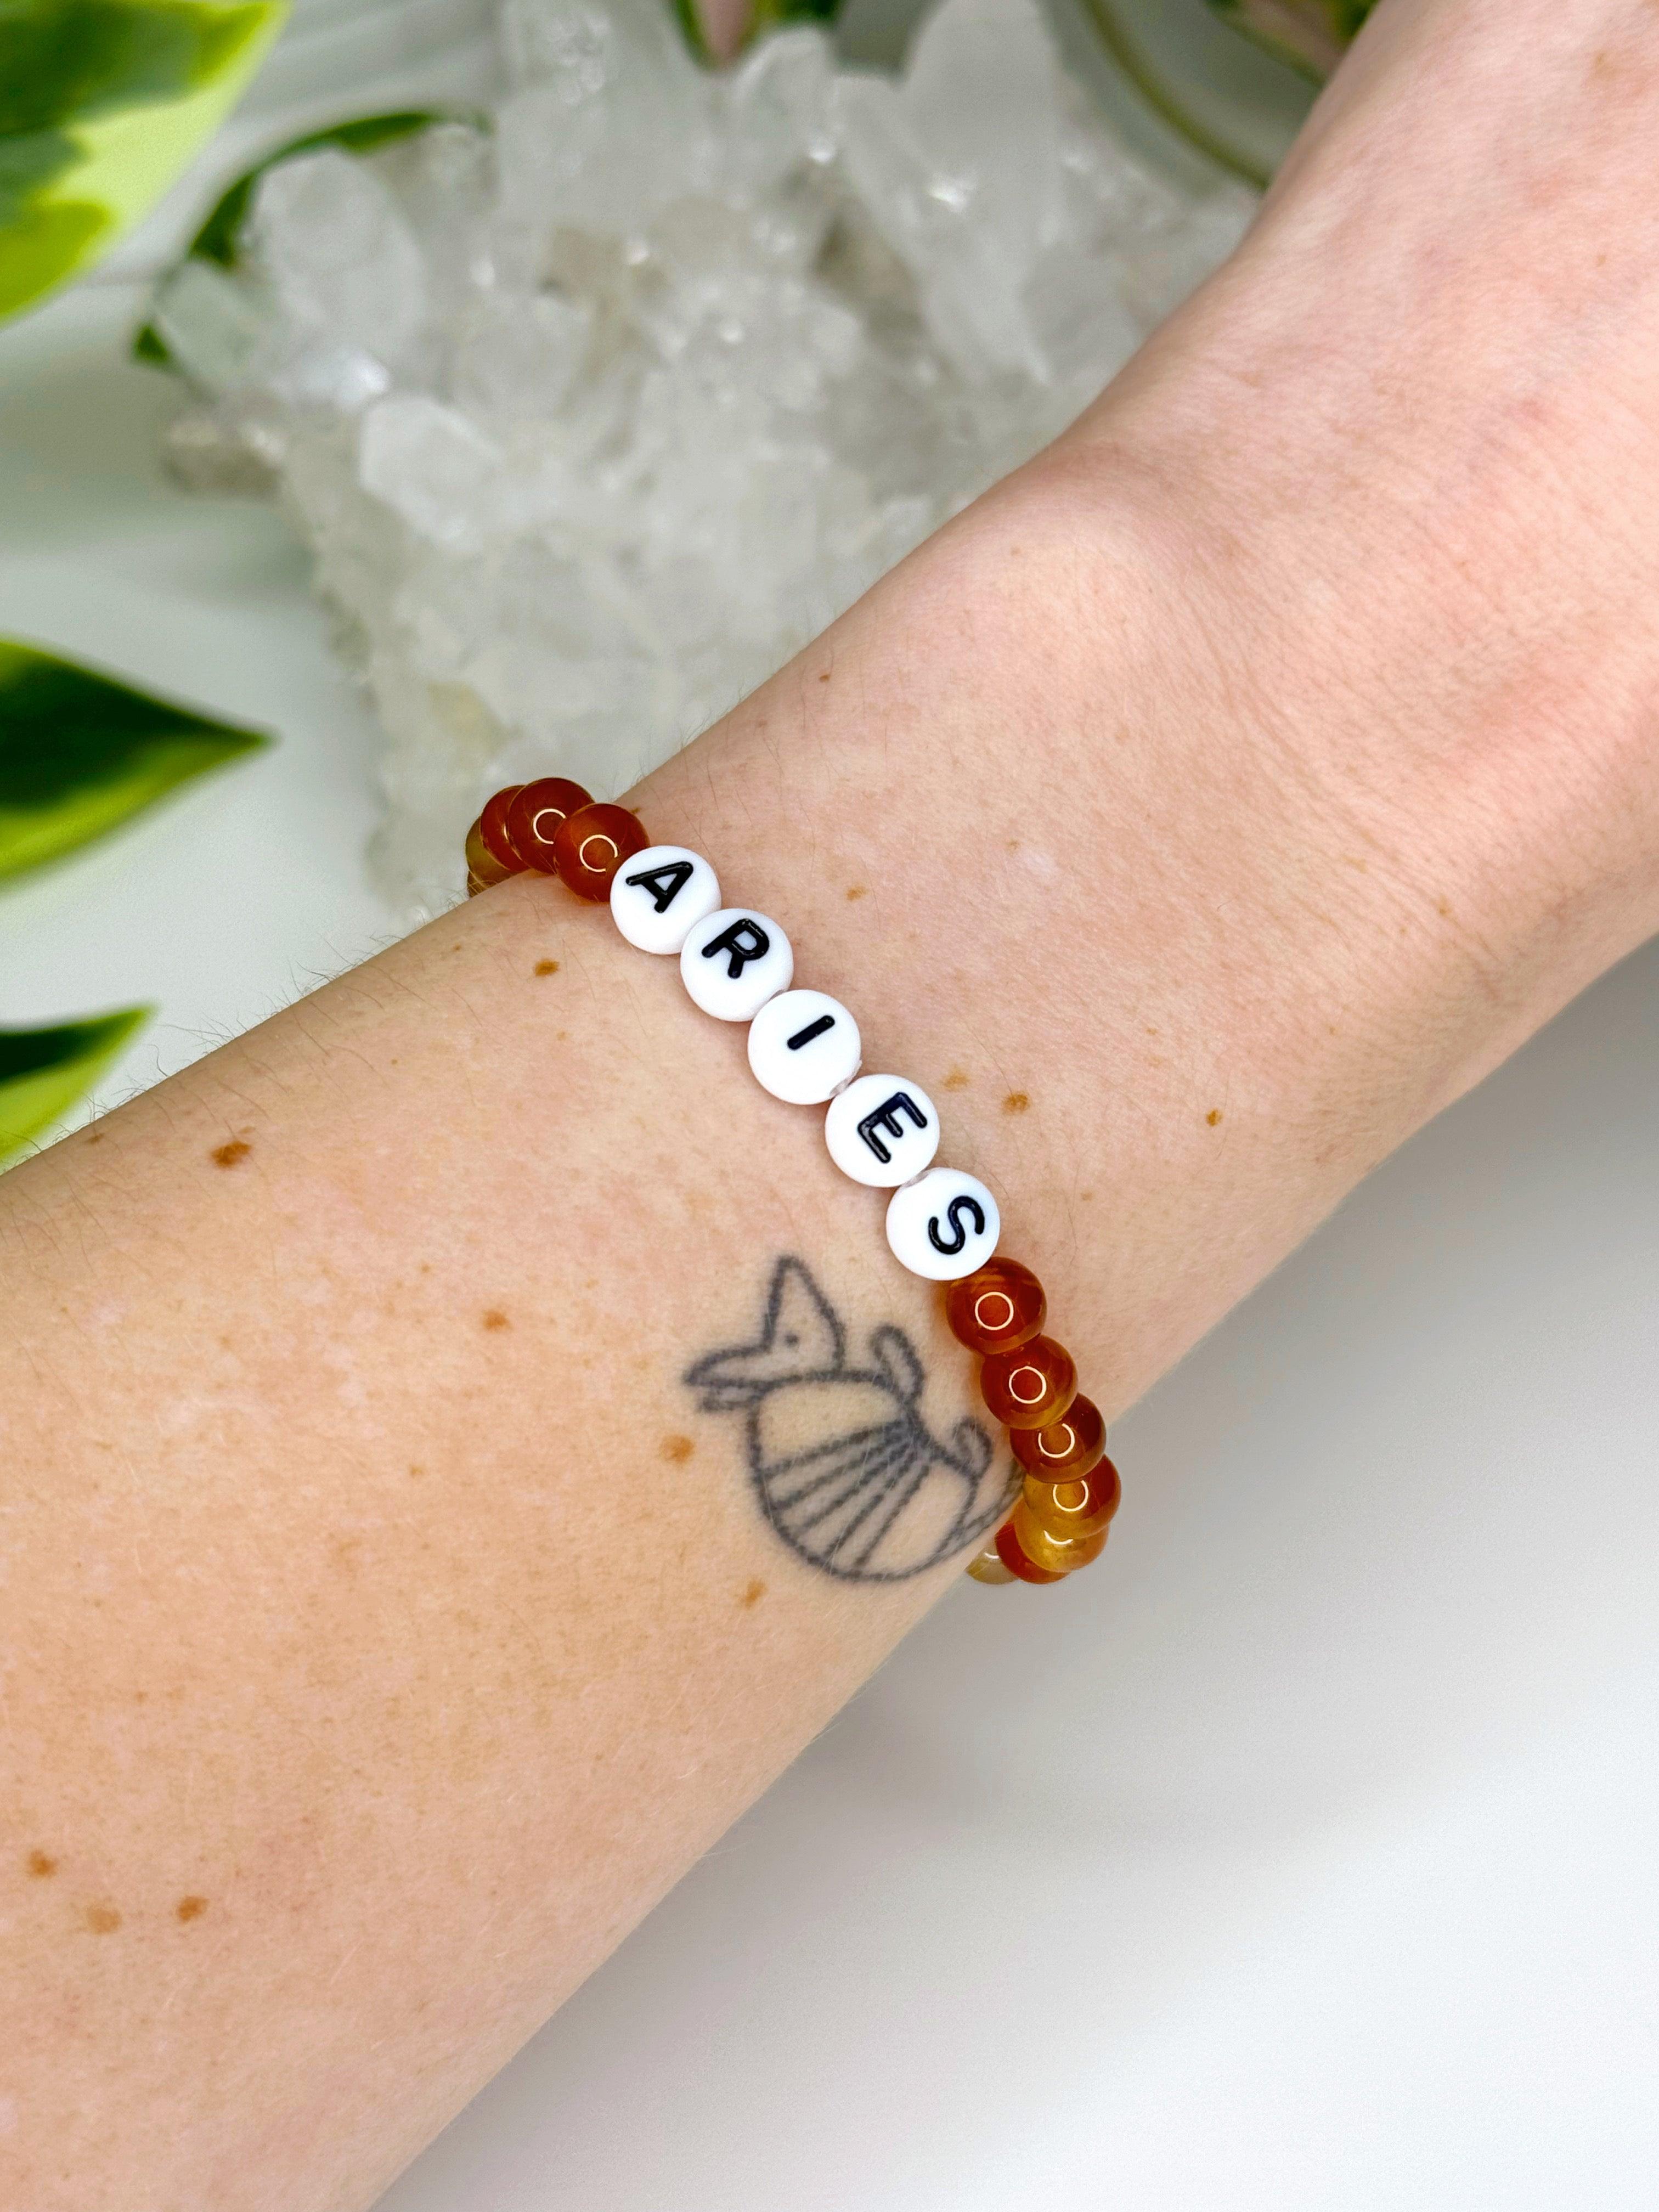 'ARIES' CARNELIAN 6mm - HANDMADE CRYSTAL BRACELET - 6mm, aries, aries season, astro collection, bracelet, carnelian, crystal bracelet, fertility, fire, handmade bracelet, jewelry, recently added, Wearable - The Mineral Maven